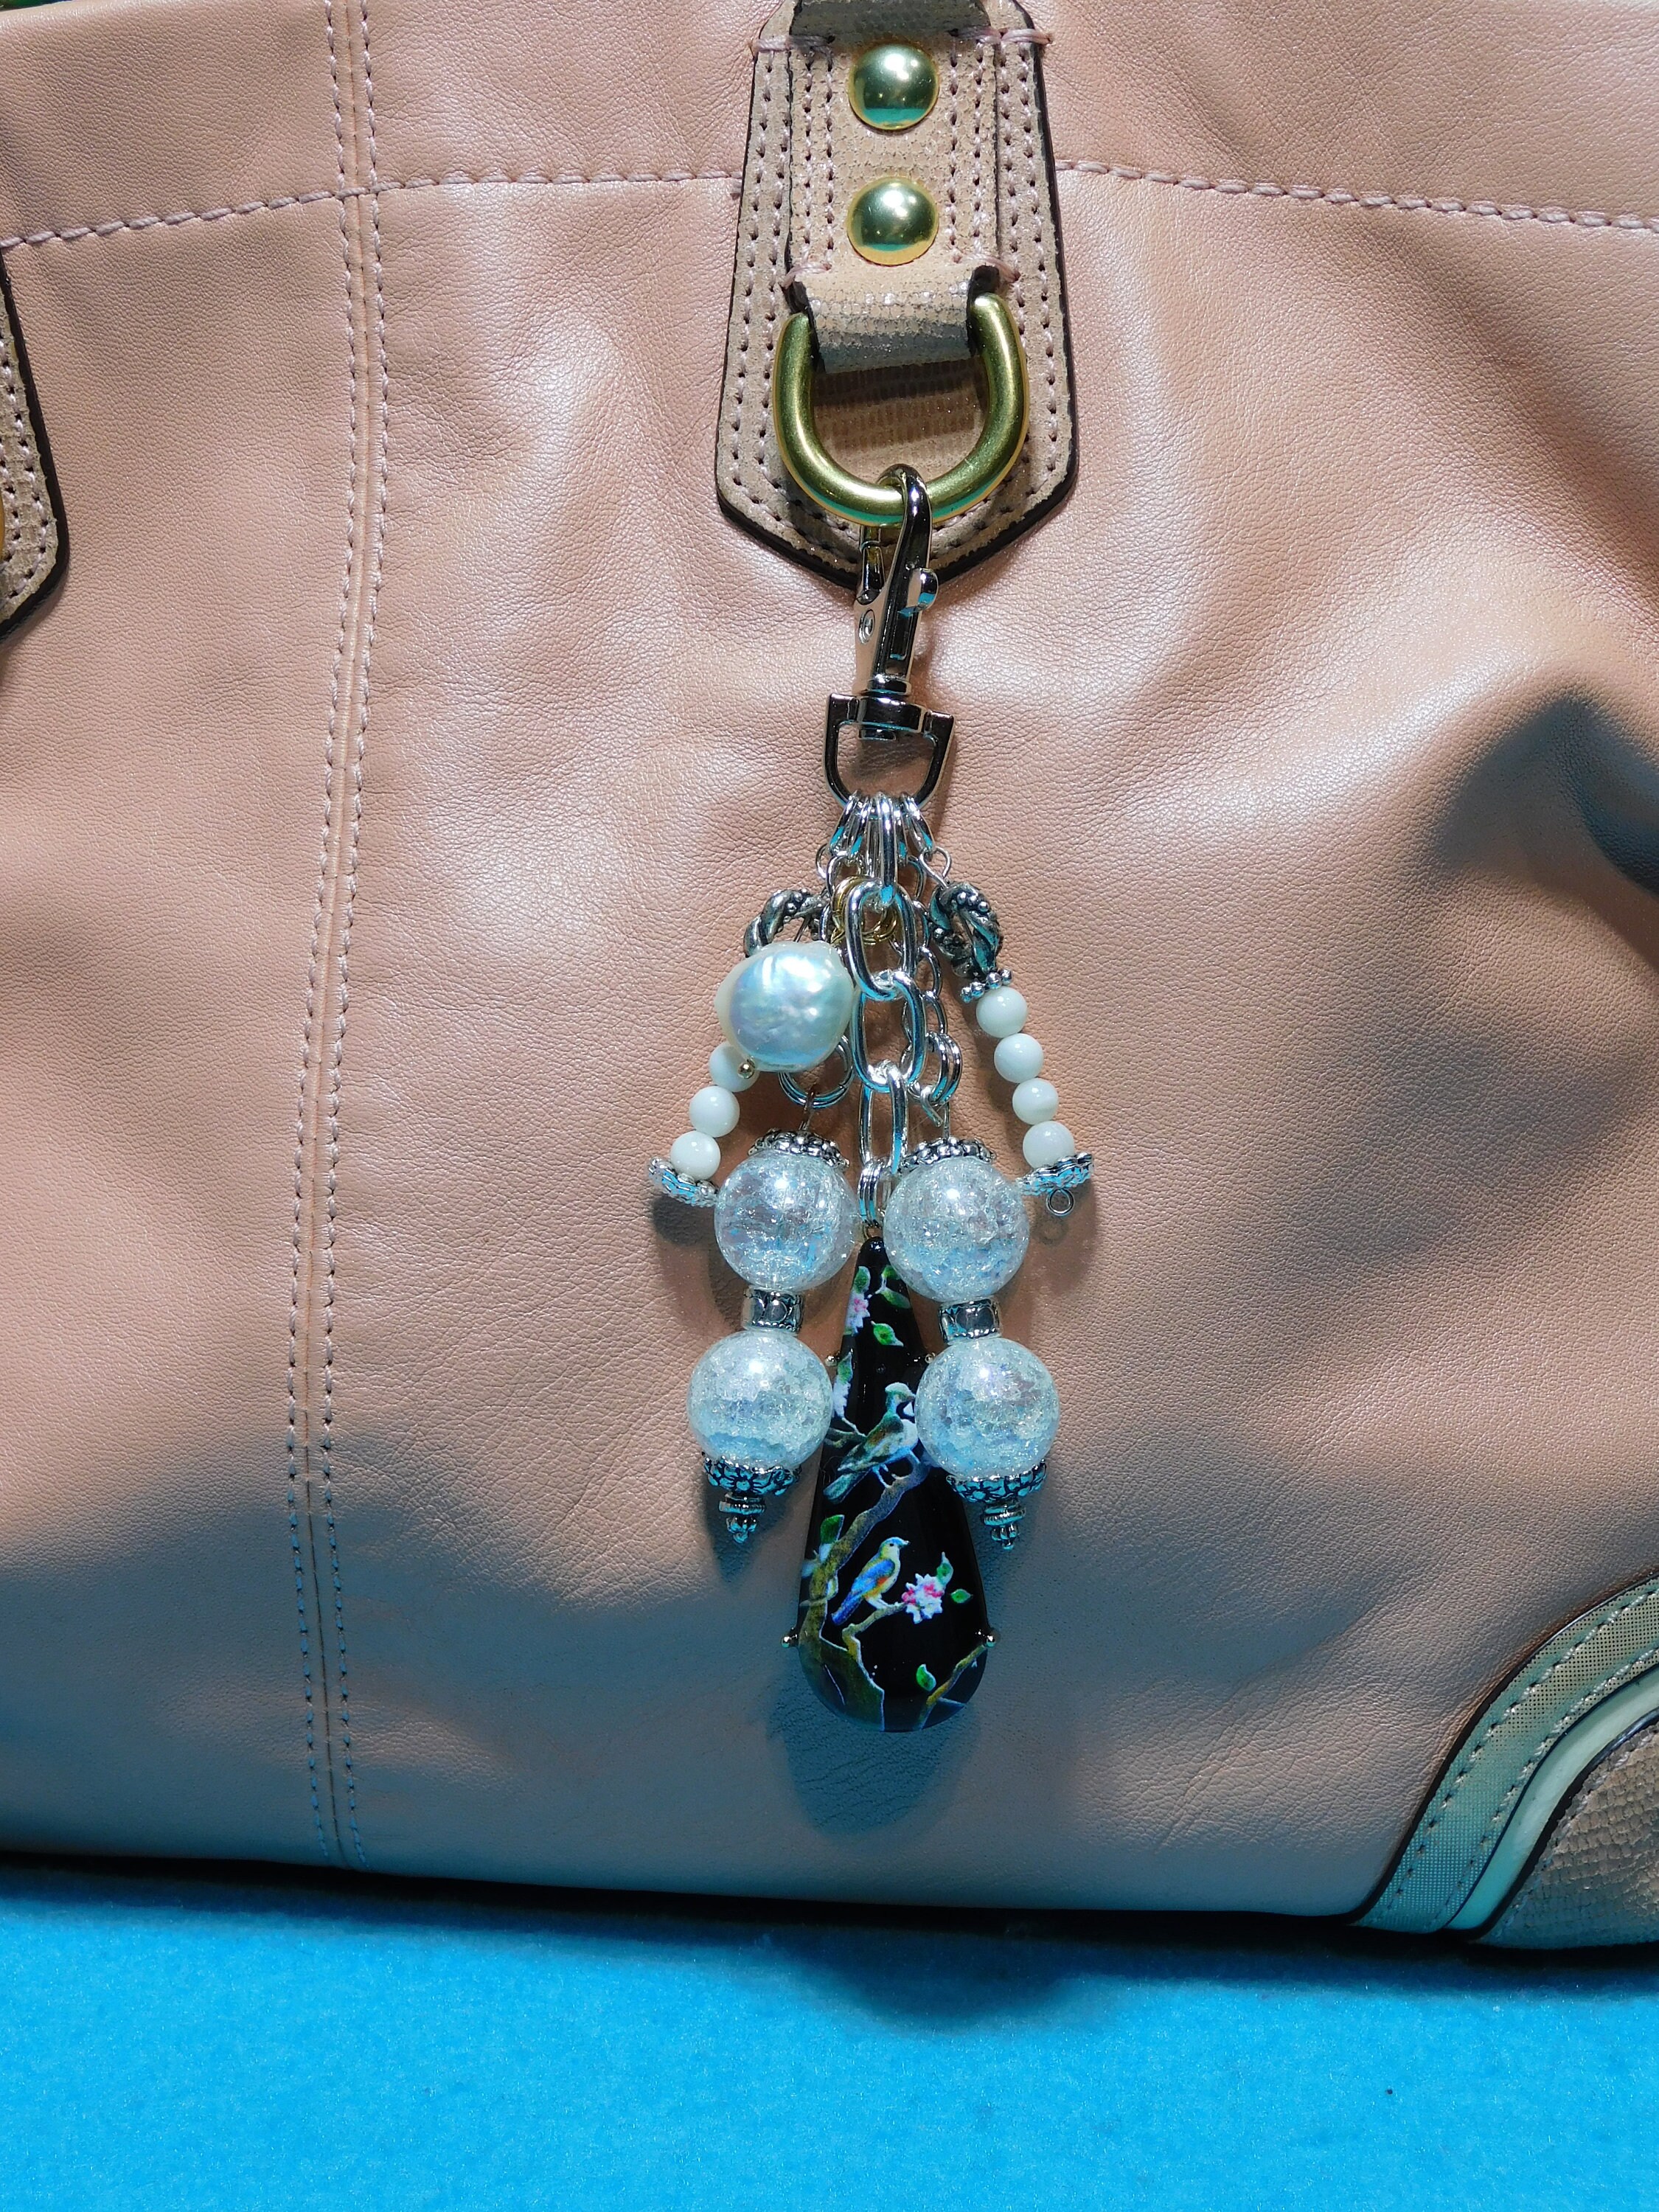 MDAuctionFinds Purse Charms Keychain Bling for Designer Purses Handcrafted, Bird and Beads